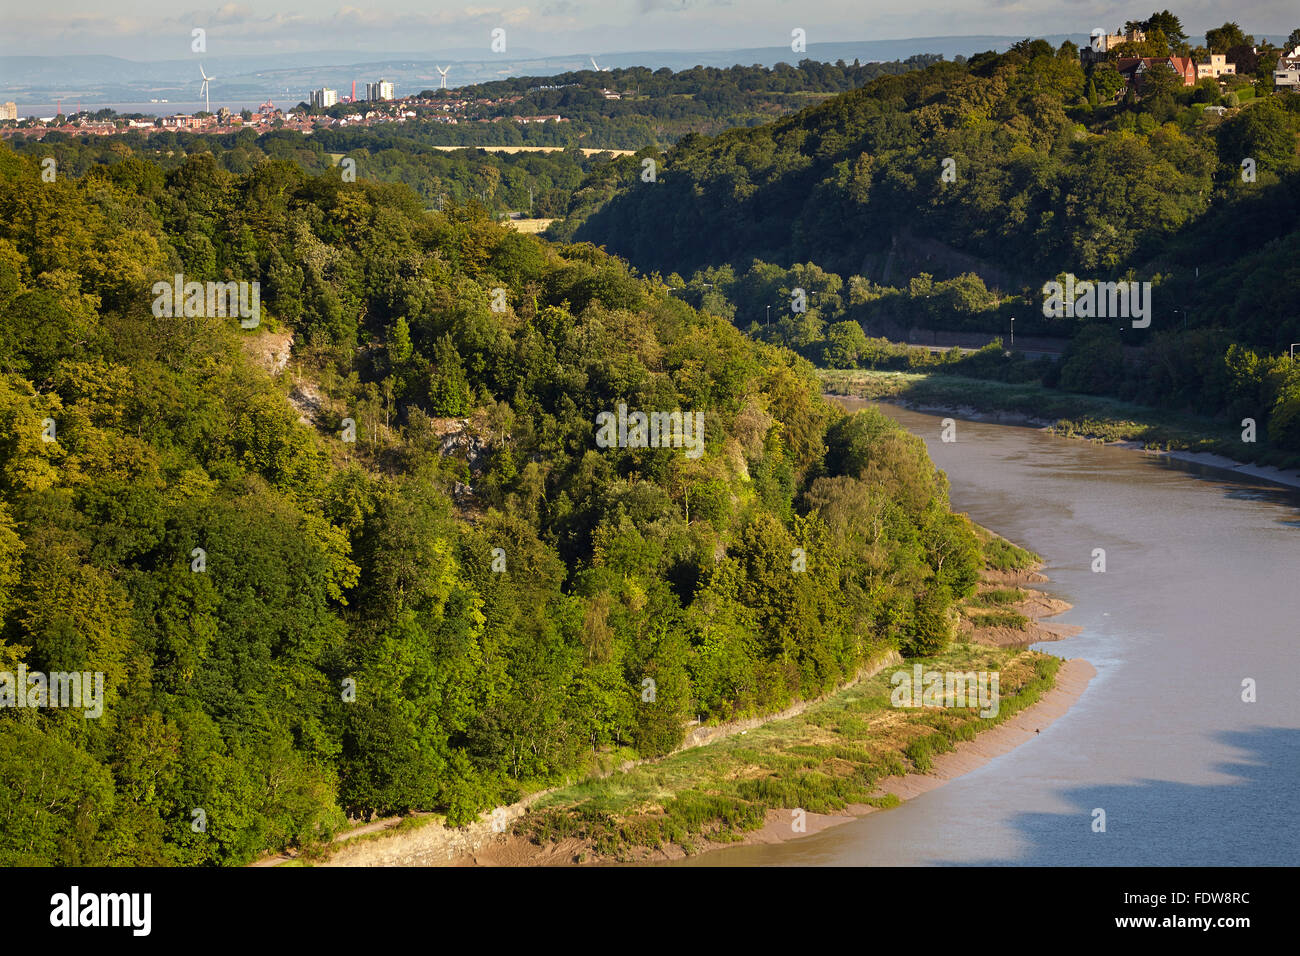 The River Avon flowing through the Avon Gorge towards Avonmouth in the distance, Bristol, Great Britain. Stock Photo